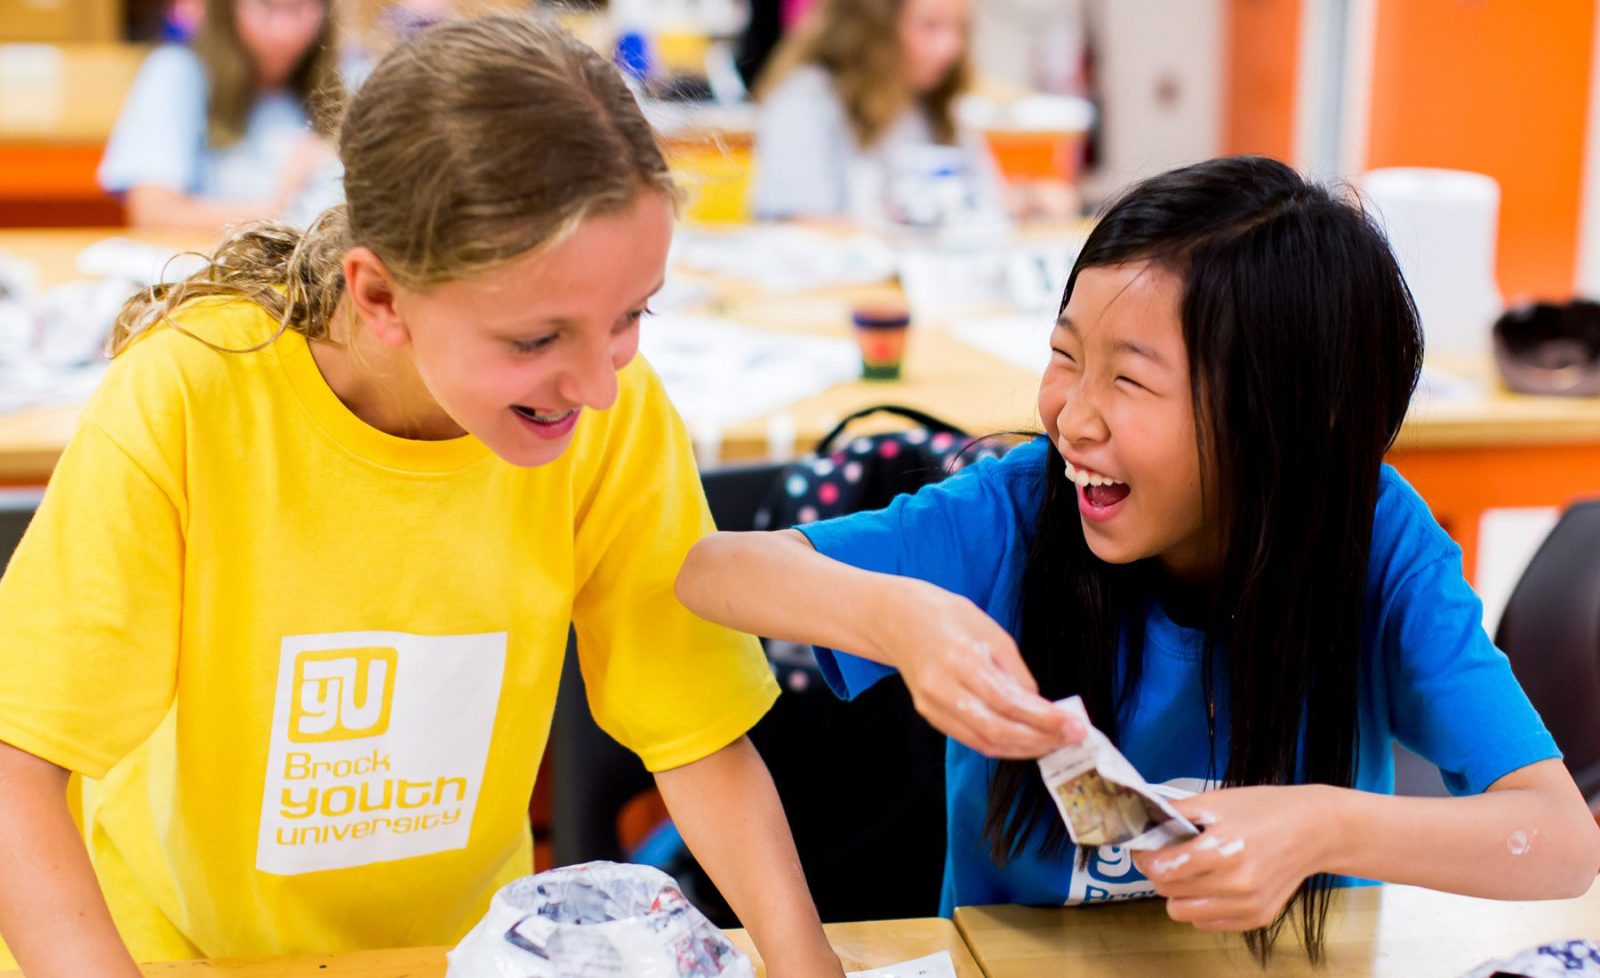 Two girls smile as they work on paper mache crafts.